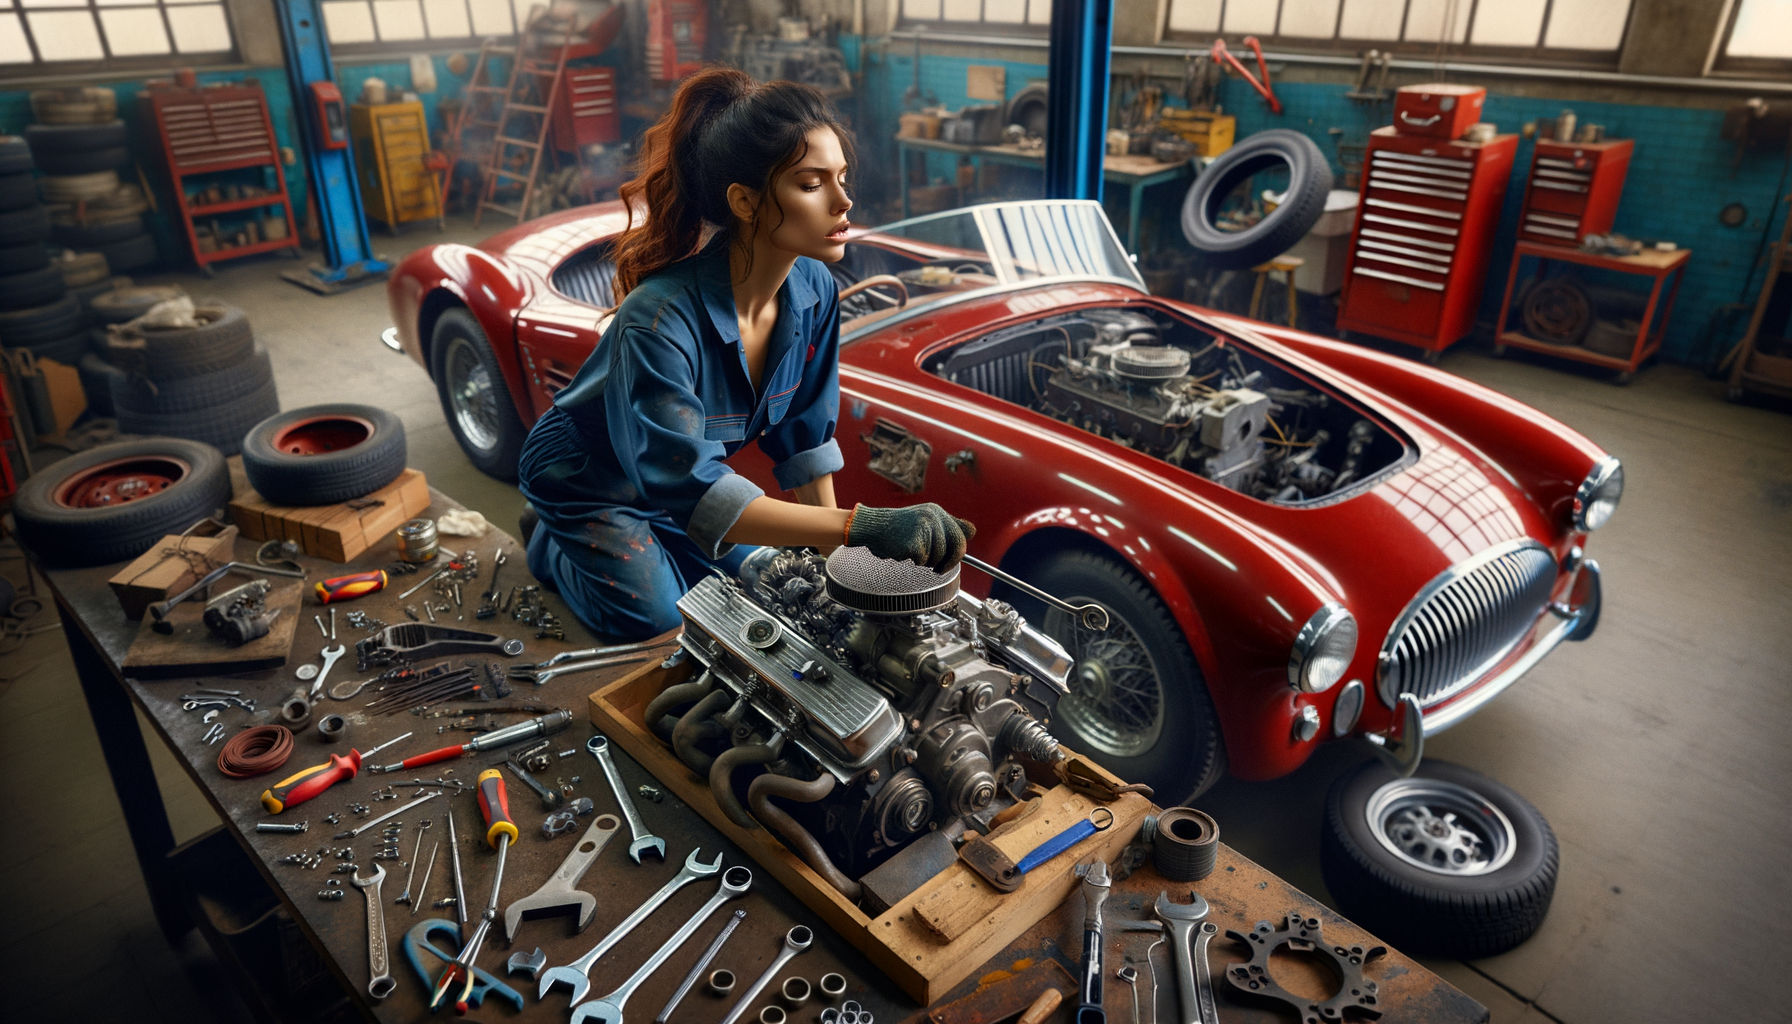 Rebuilding a salvage vehicle in a workshop